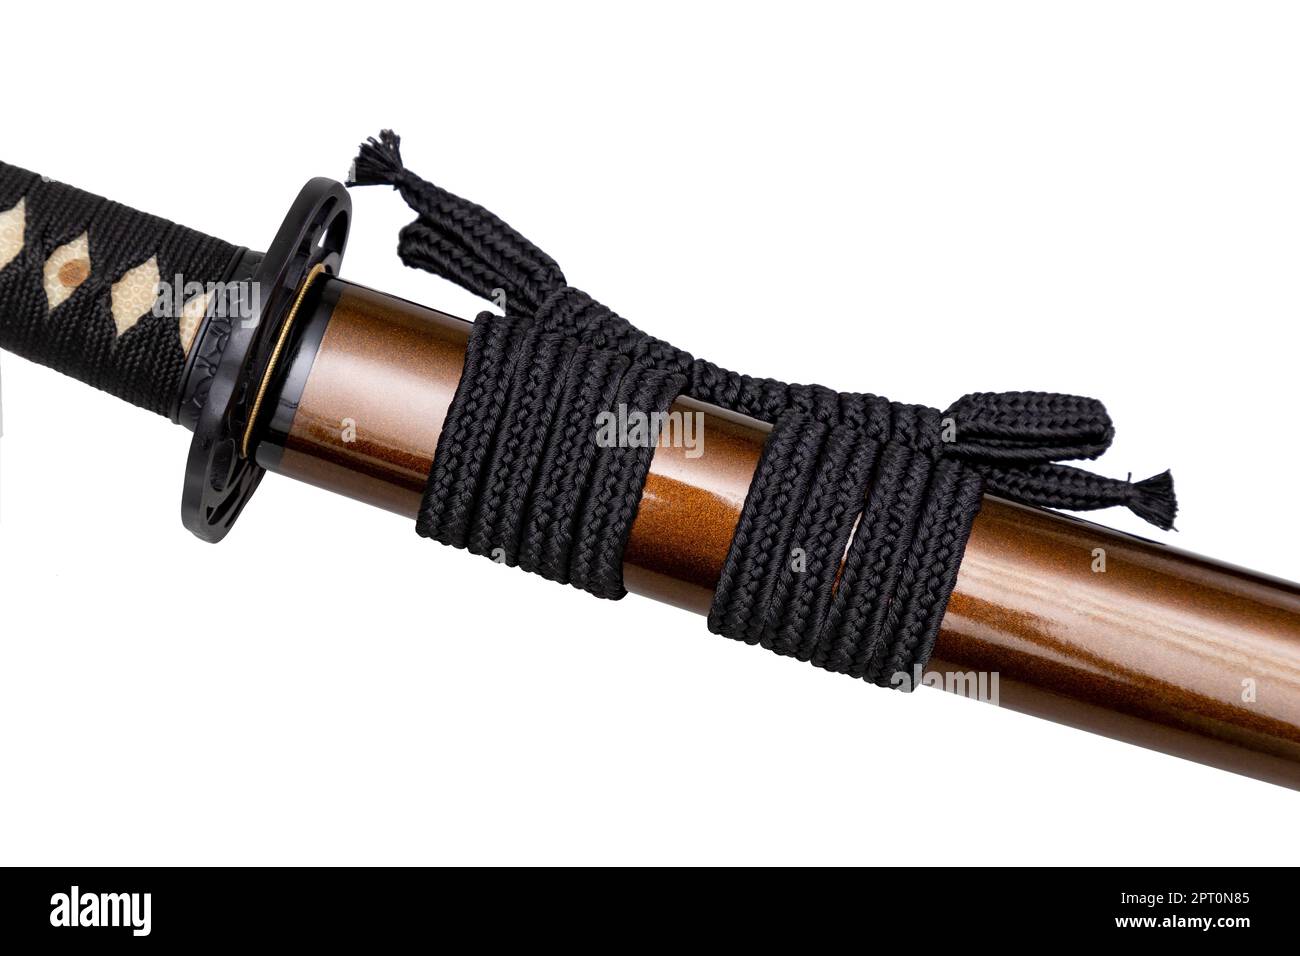 https://c8.alamy.com/comp/2PT0N85/black-color-sageo-japanese-sword-sheath-rope-made-of-high-quality-silk-isolated-on-white-background-selective-focus-2PT0N85.jpg